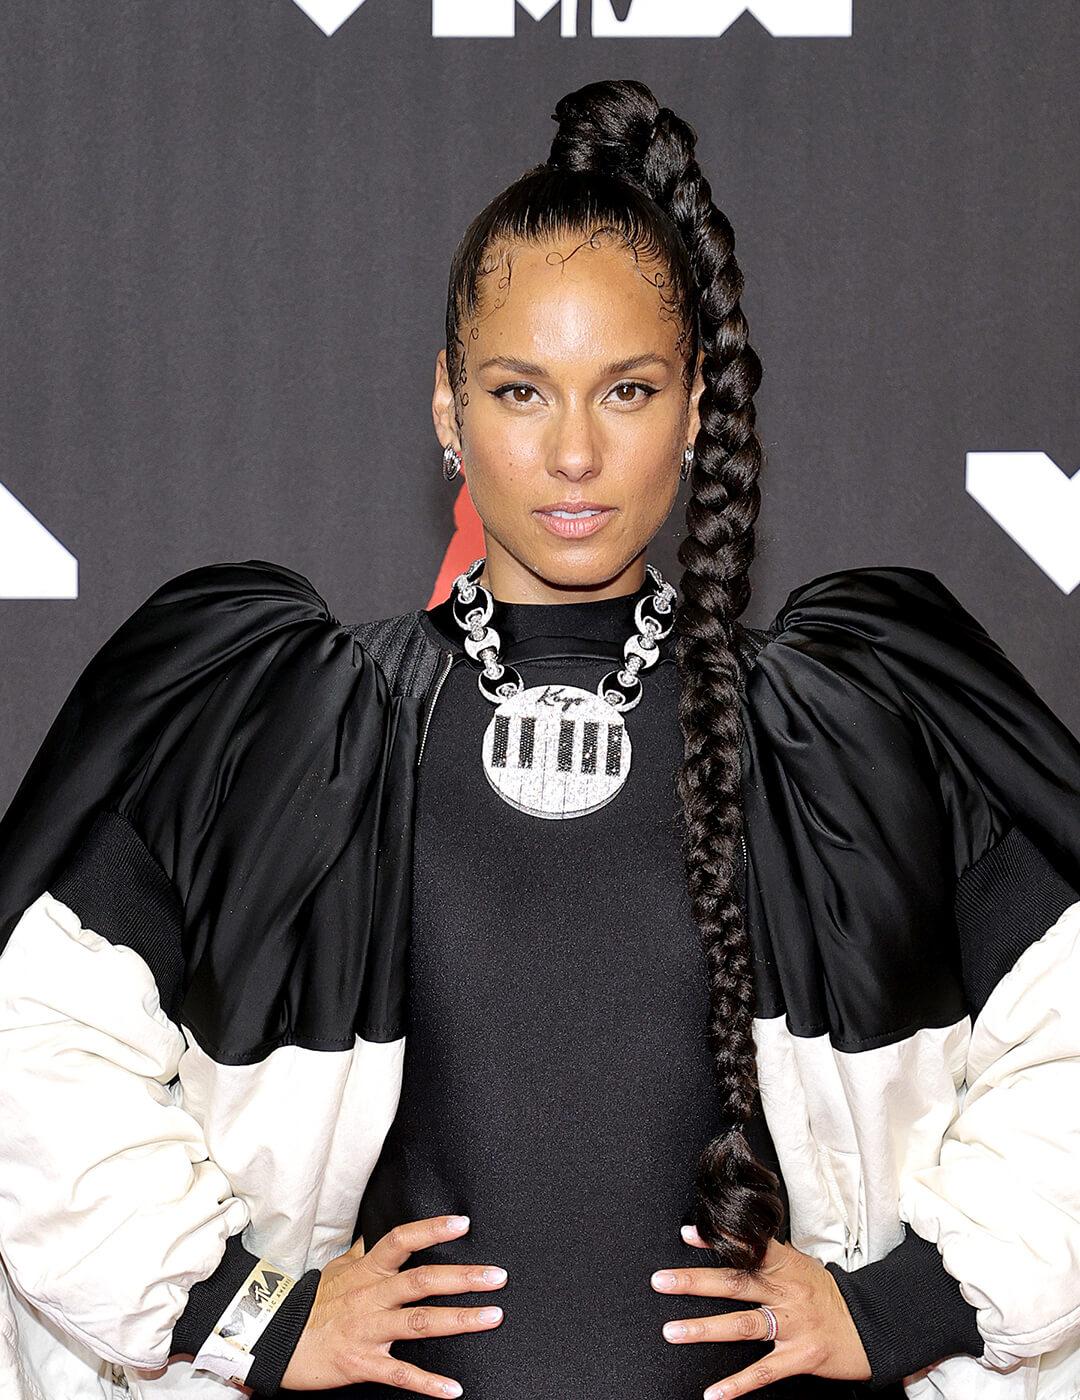 Alicia Keys rocking a braided high ponytail hairstyle and black and white dress on the red carpet